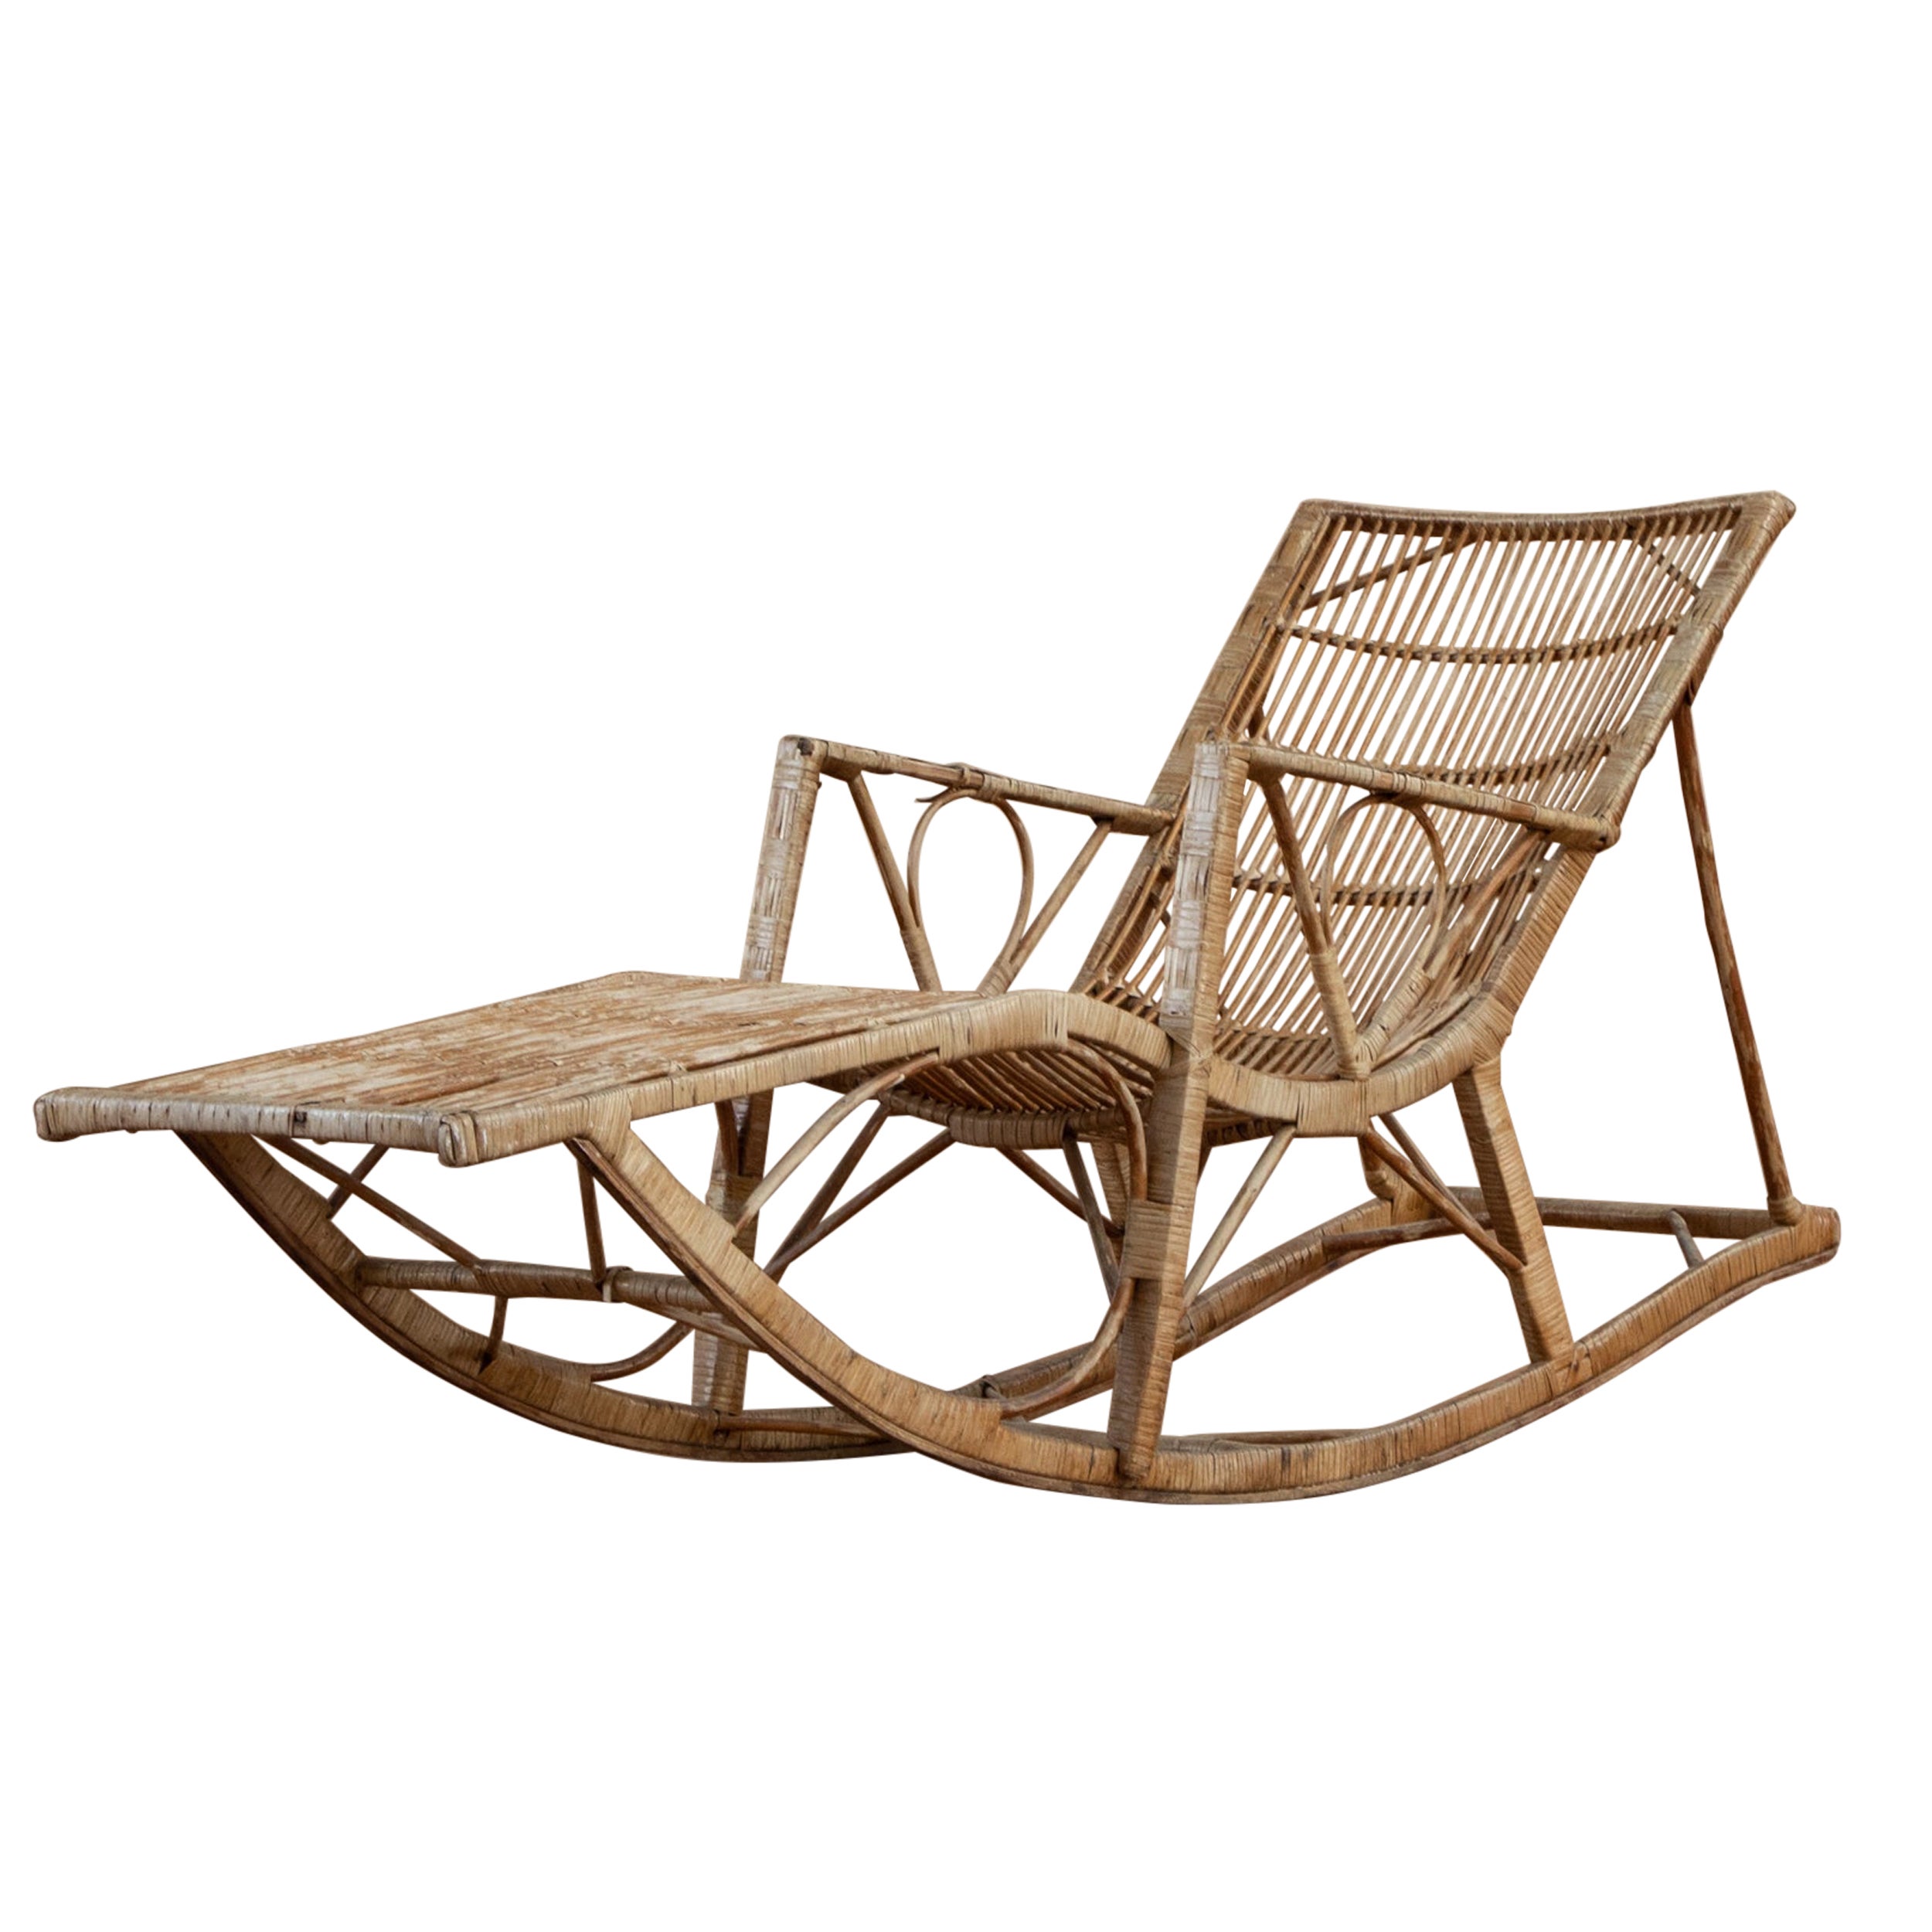 Antique 1920s bamboo lounger, steamer chair For Sale